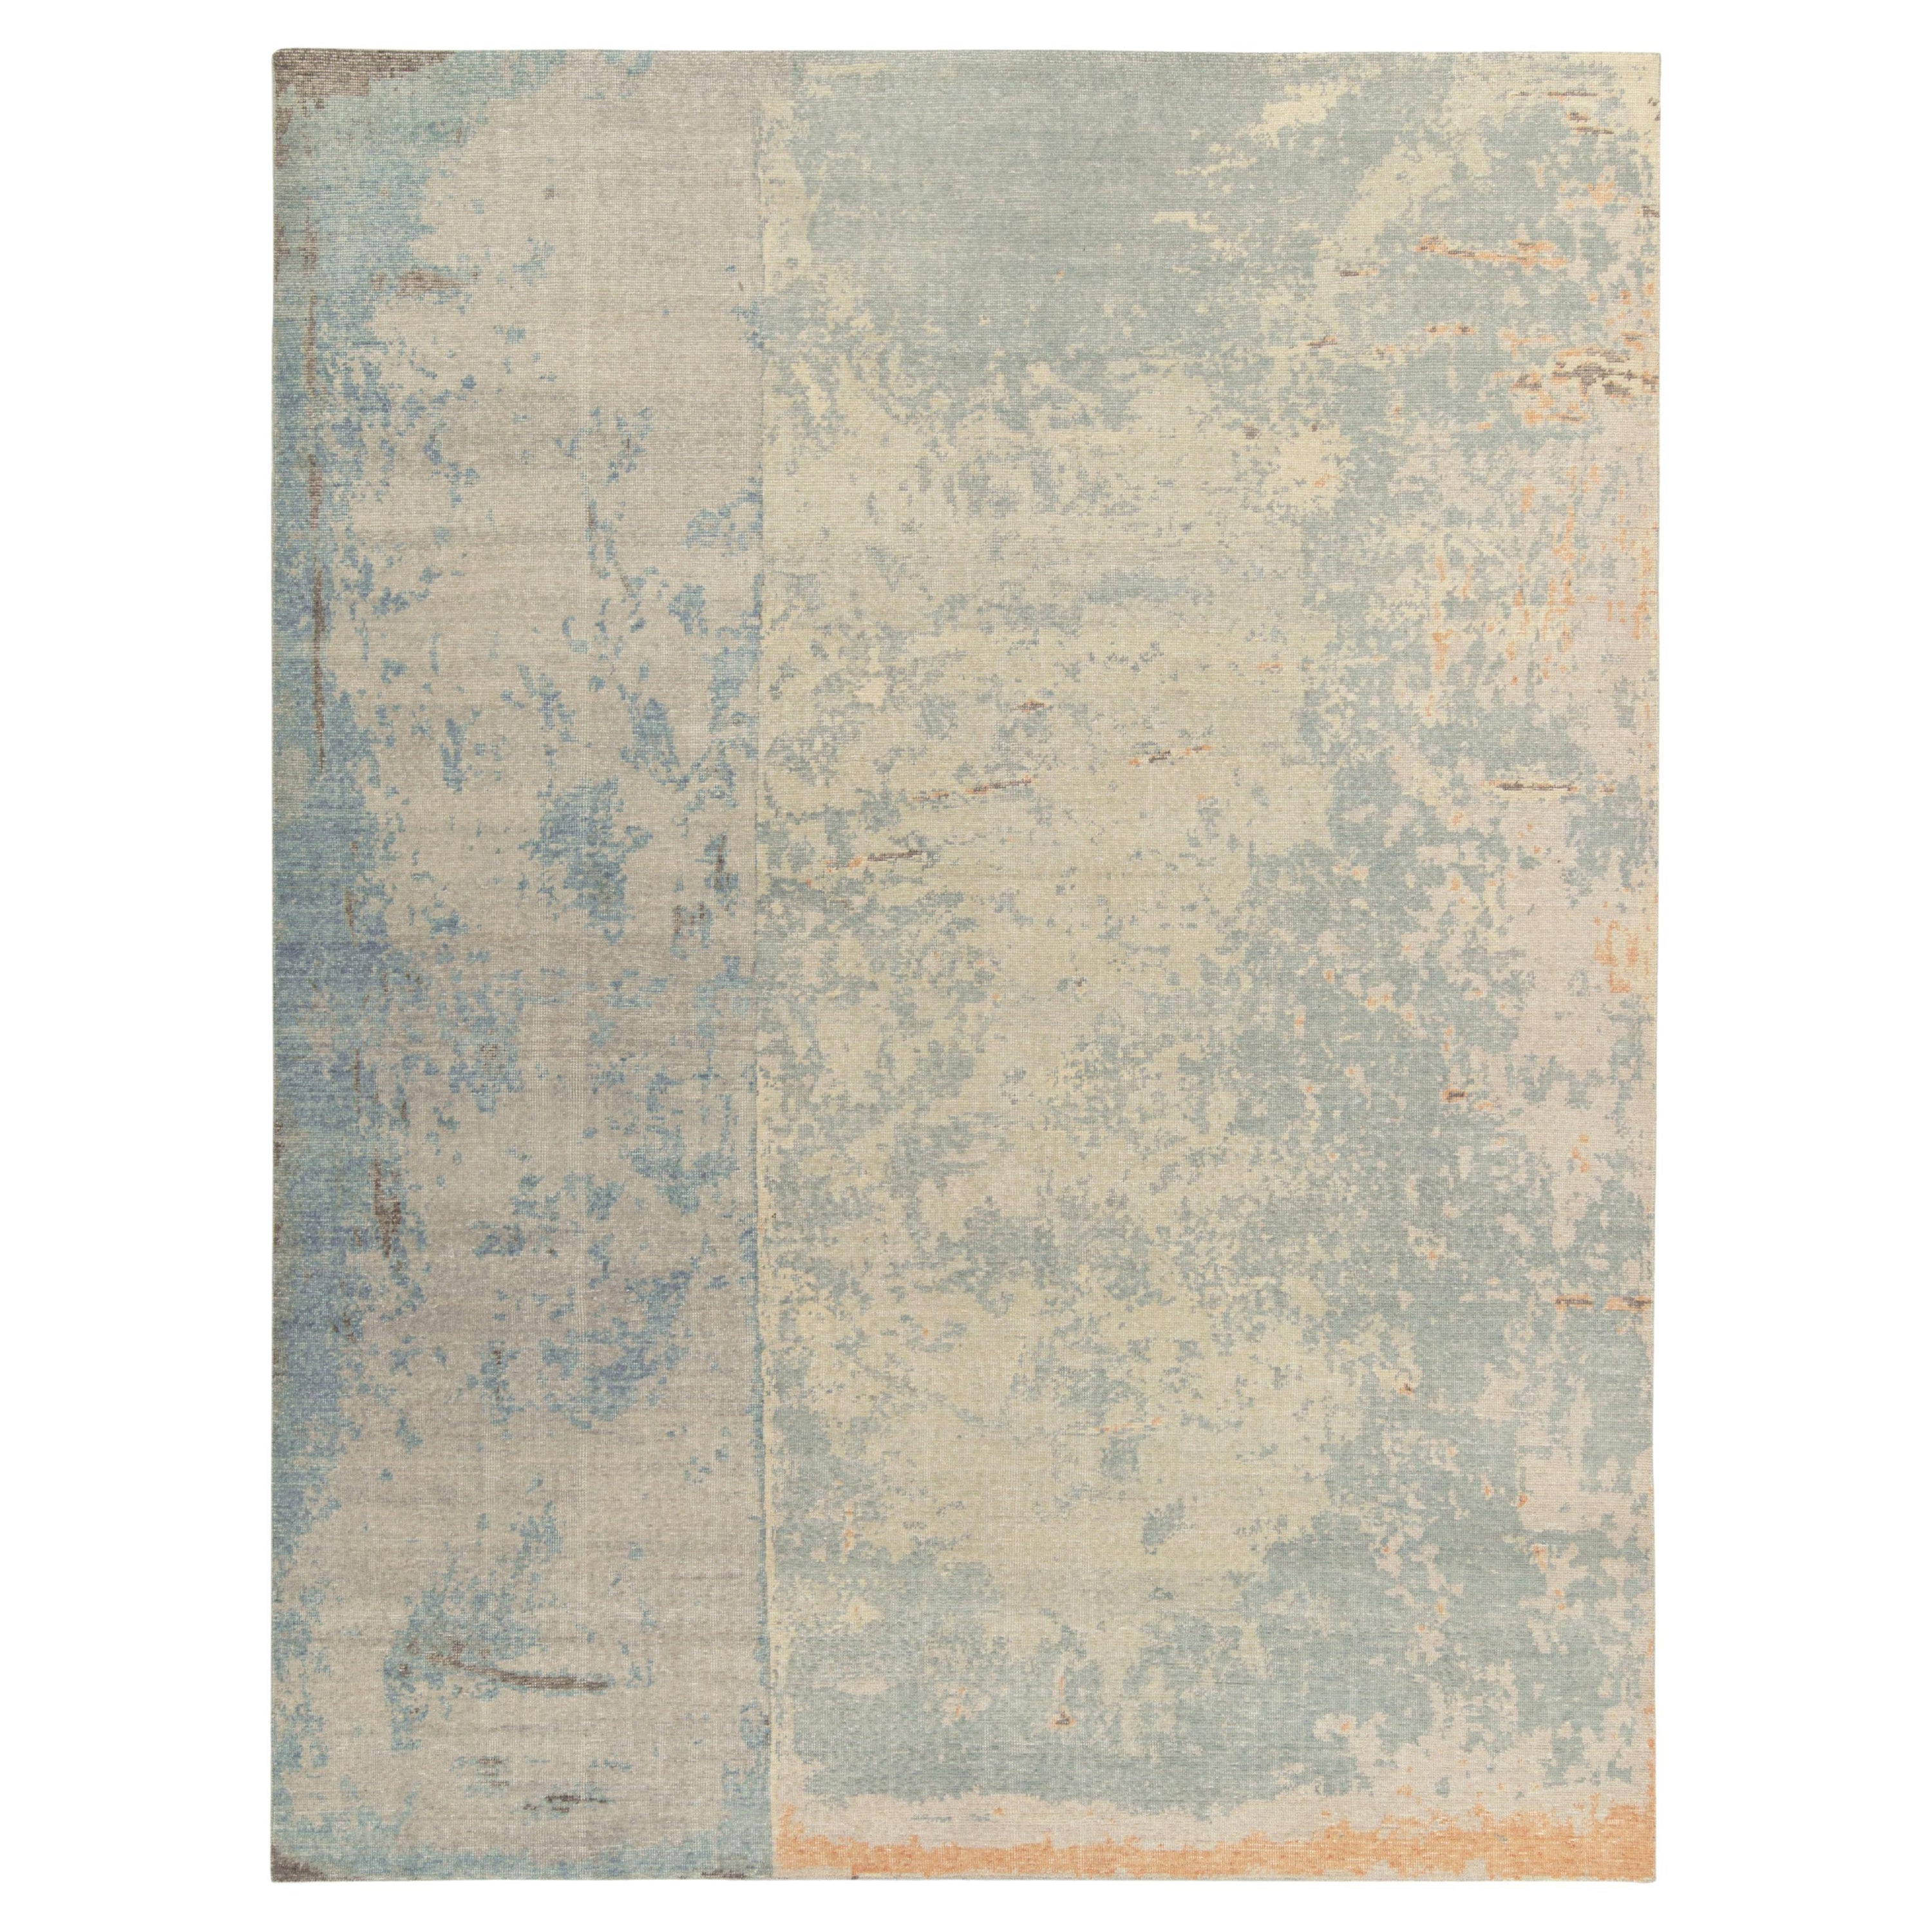 Rug & Kilim's Distressed Style Modern Rug in Blue, Gray, Beige Abstract Pattern